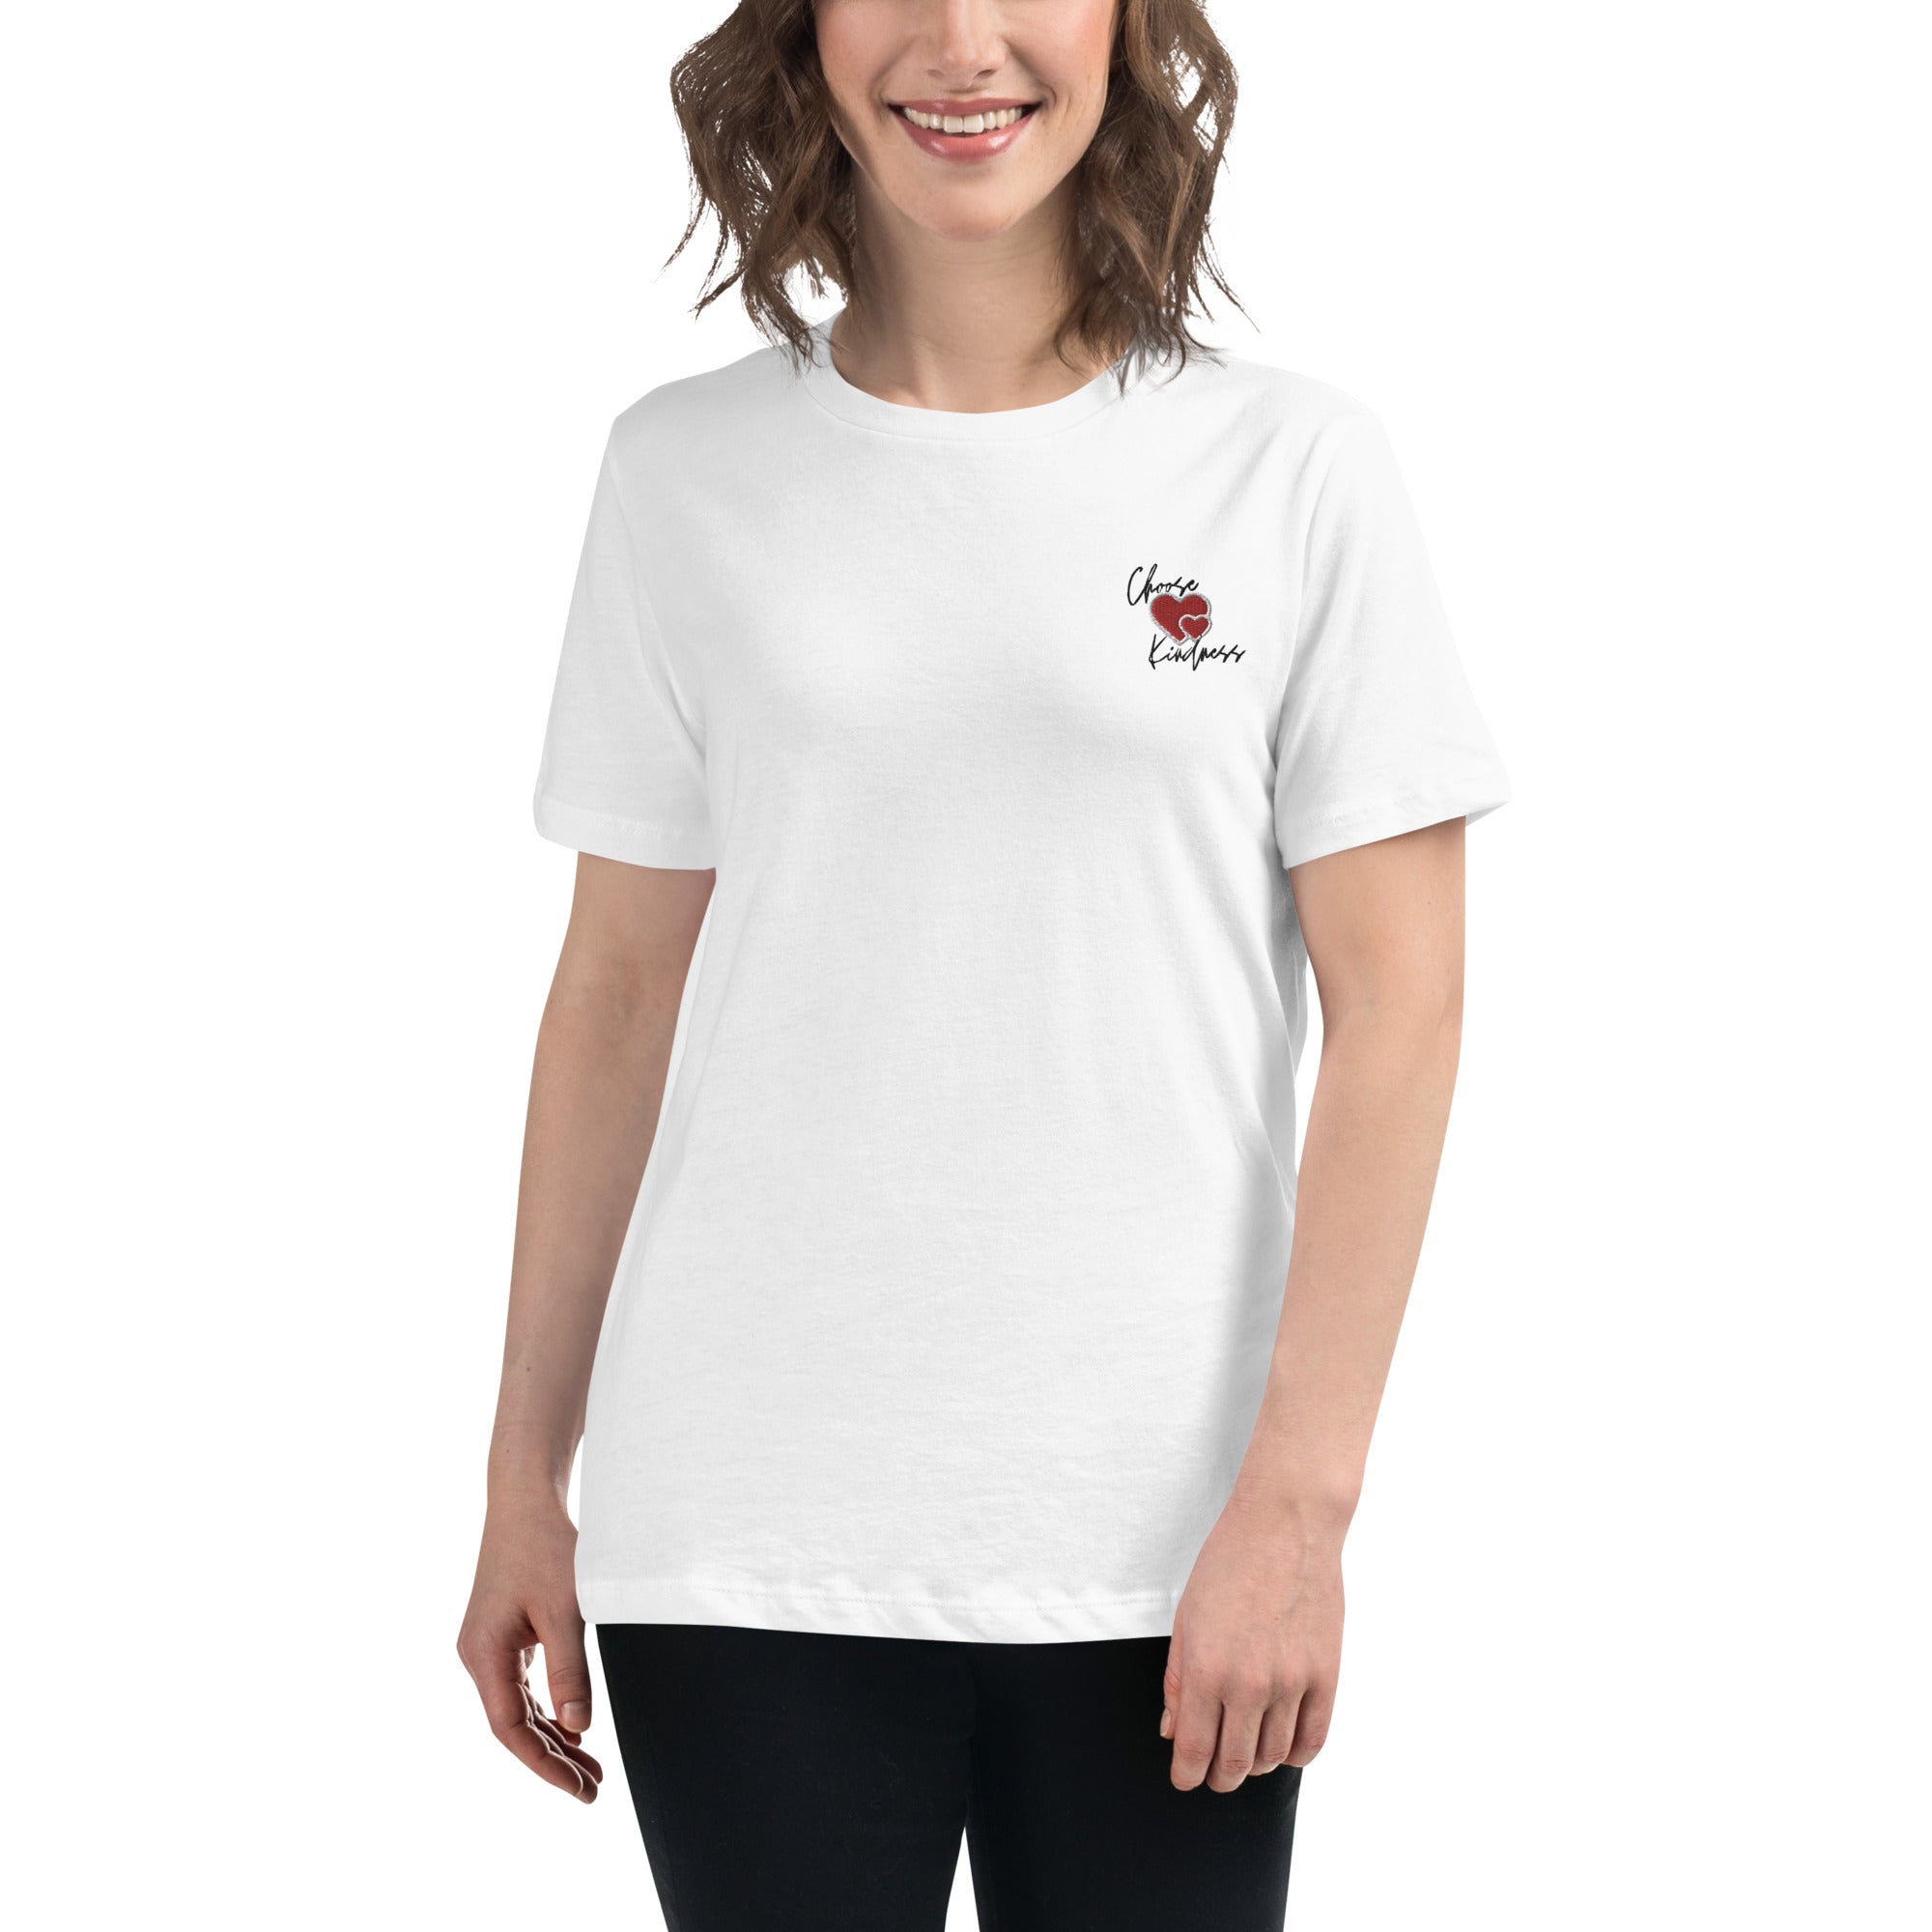 Choose Kindness Embroidered Women's Relaxed T-Shirt - The Kindness Cause